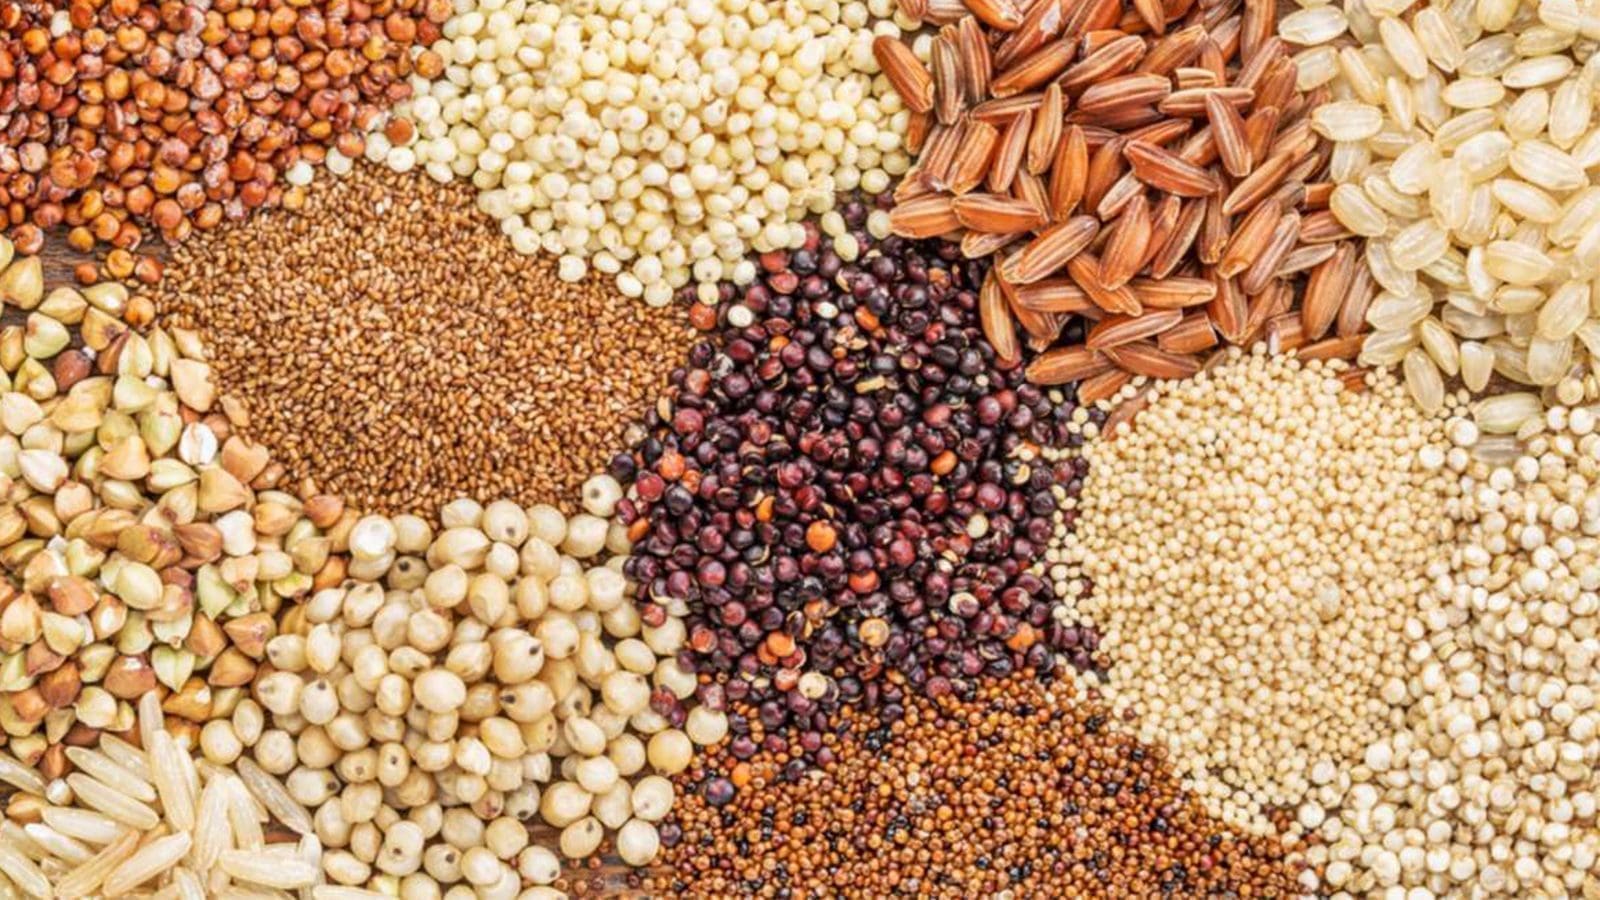 India specifies safety standards for millets ahead of production boom